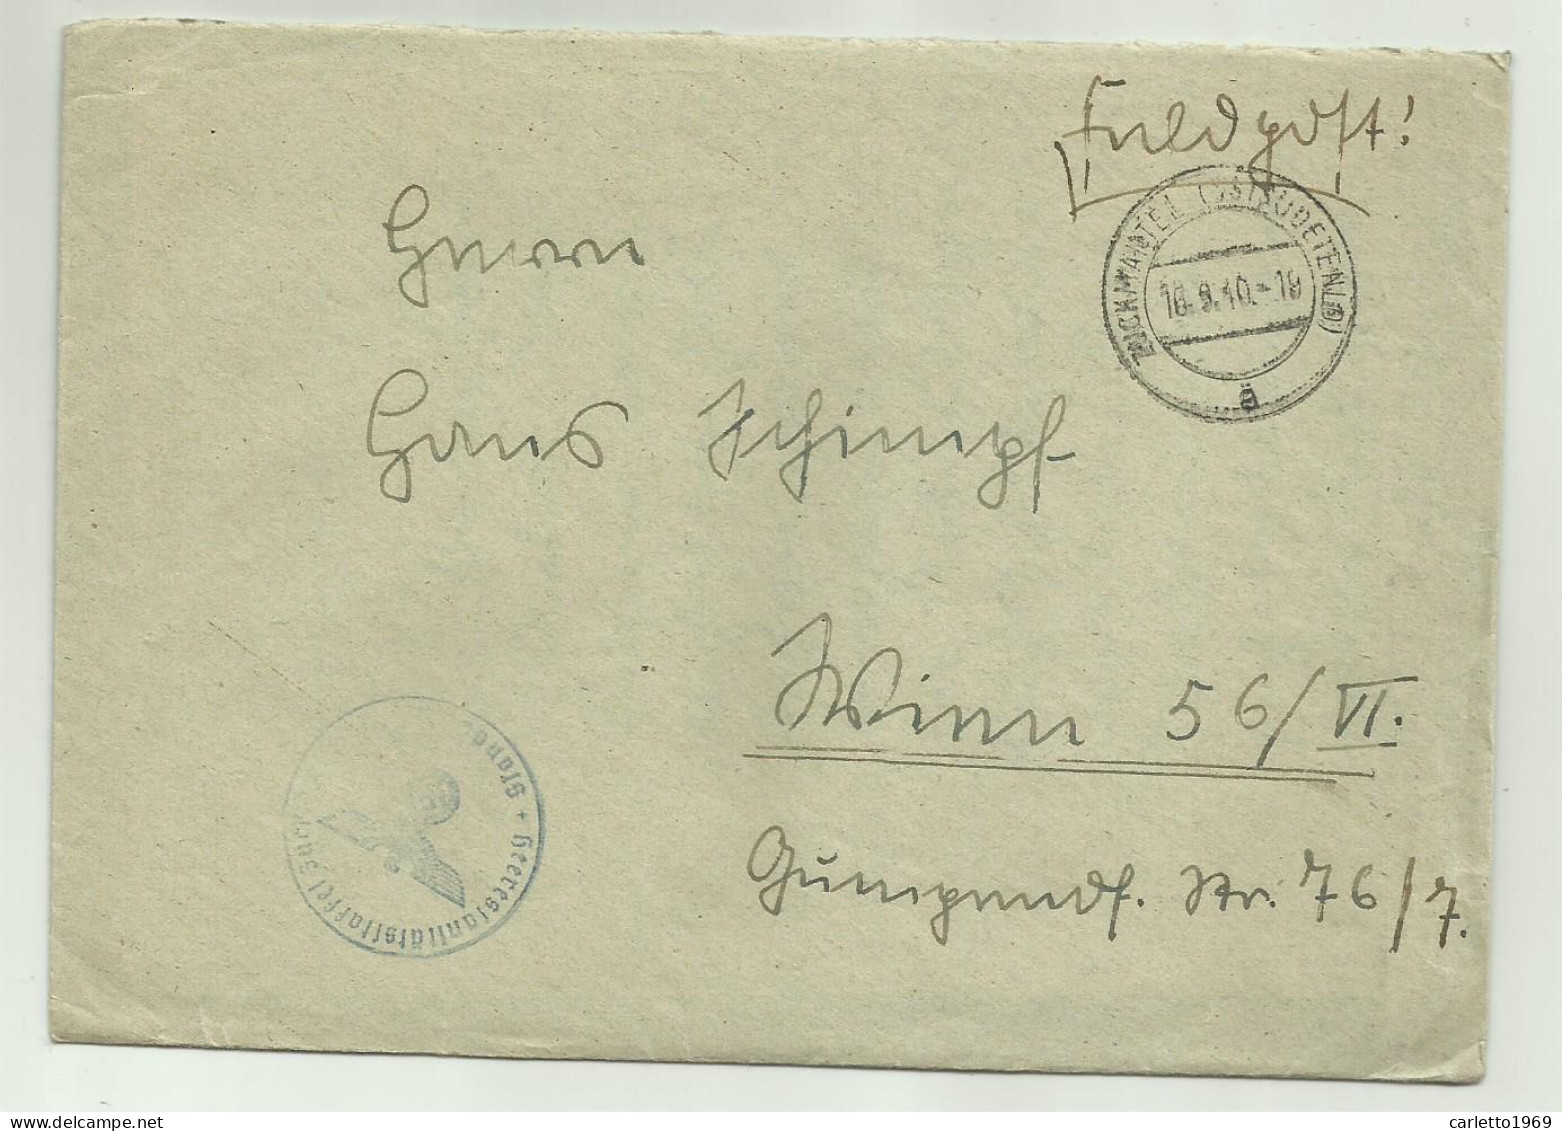  FELDPOST  1940  CON LETTERA  - Used Stamps